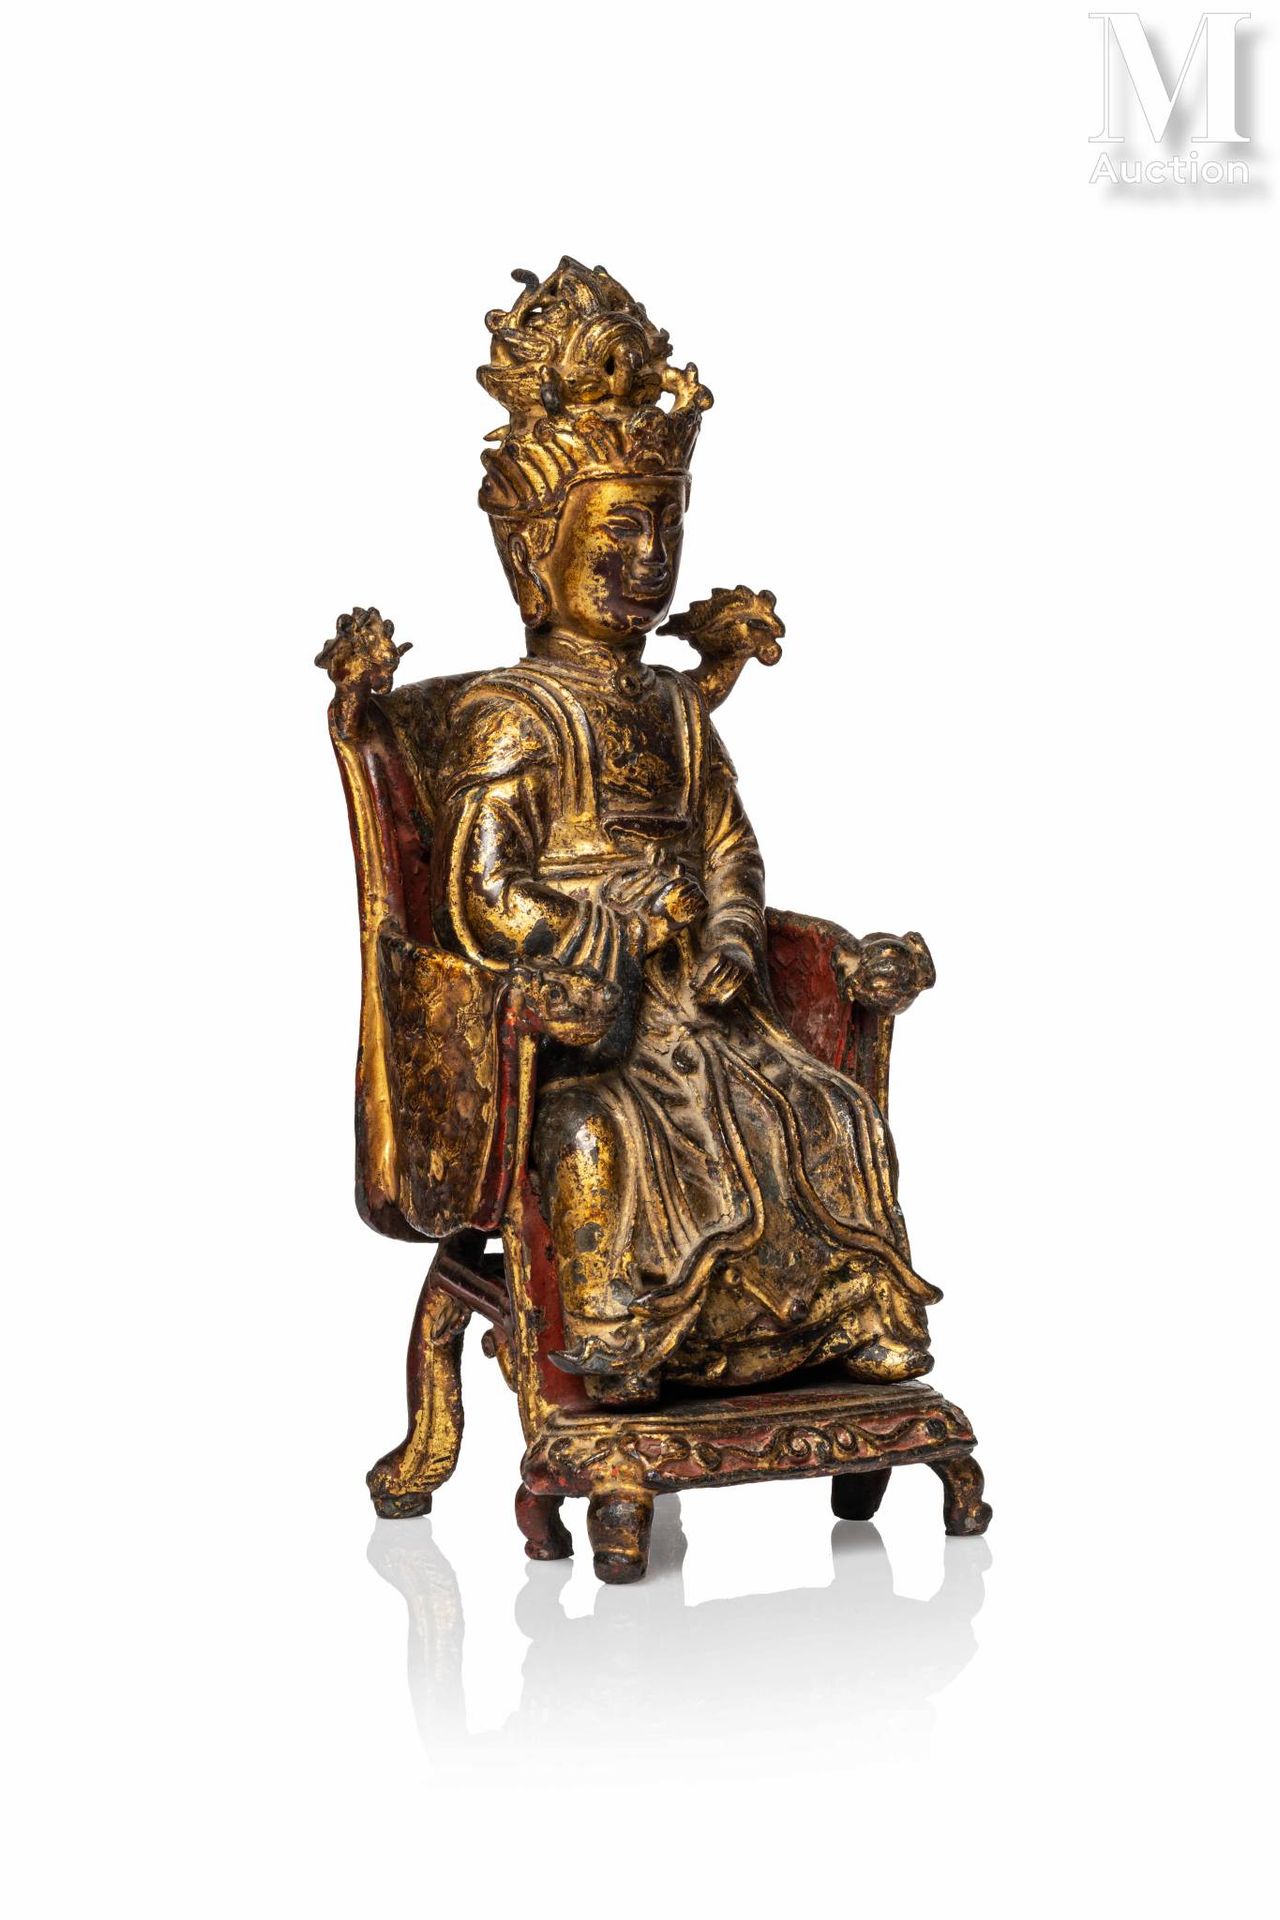 CHINE, Epoque Ming, XVIIe siècle Statuette in lacquered and gilded bronze

depic&hellip;